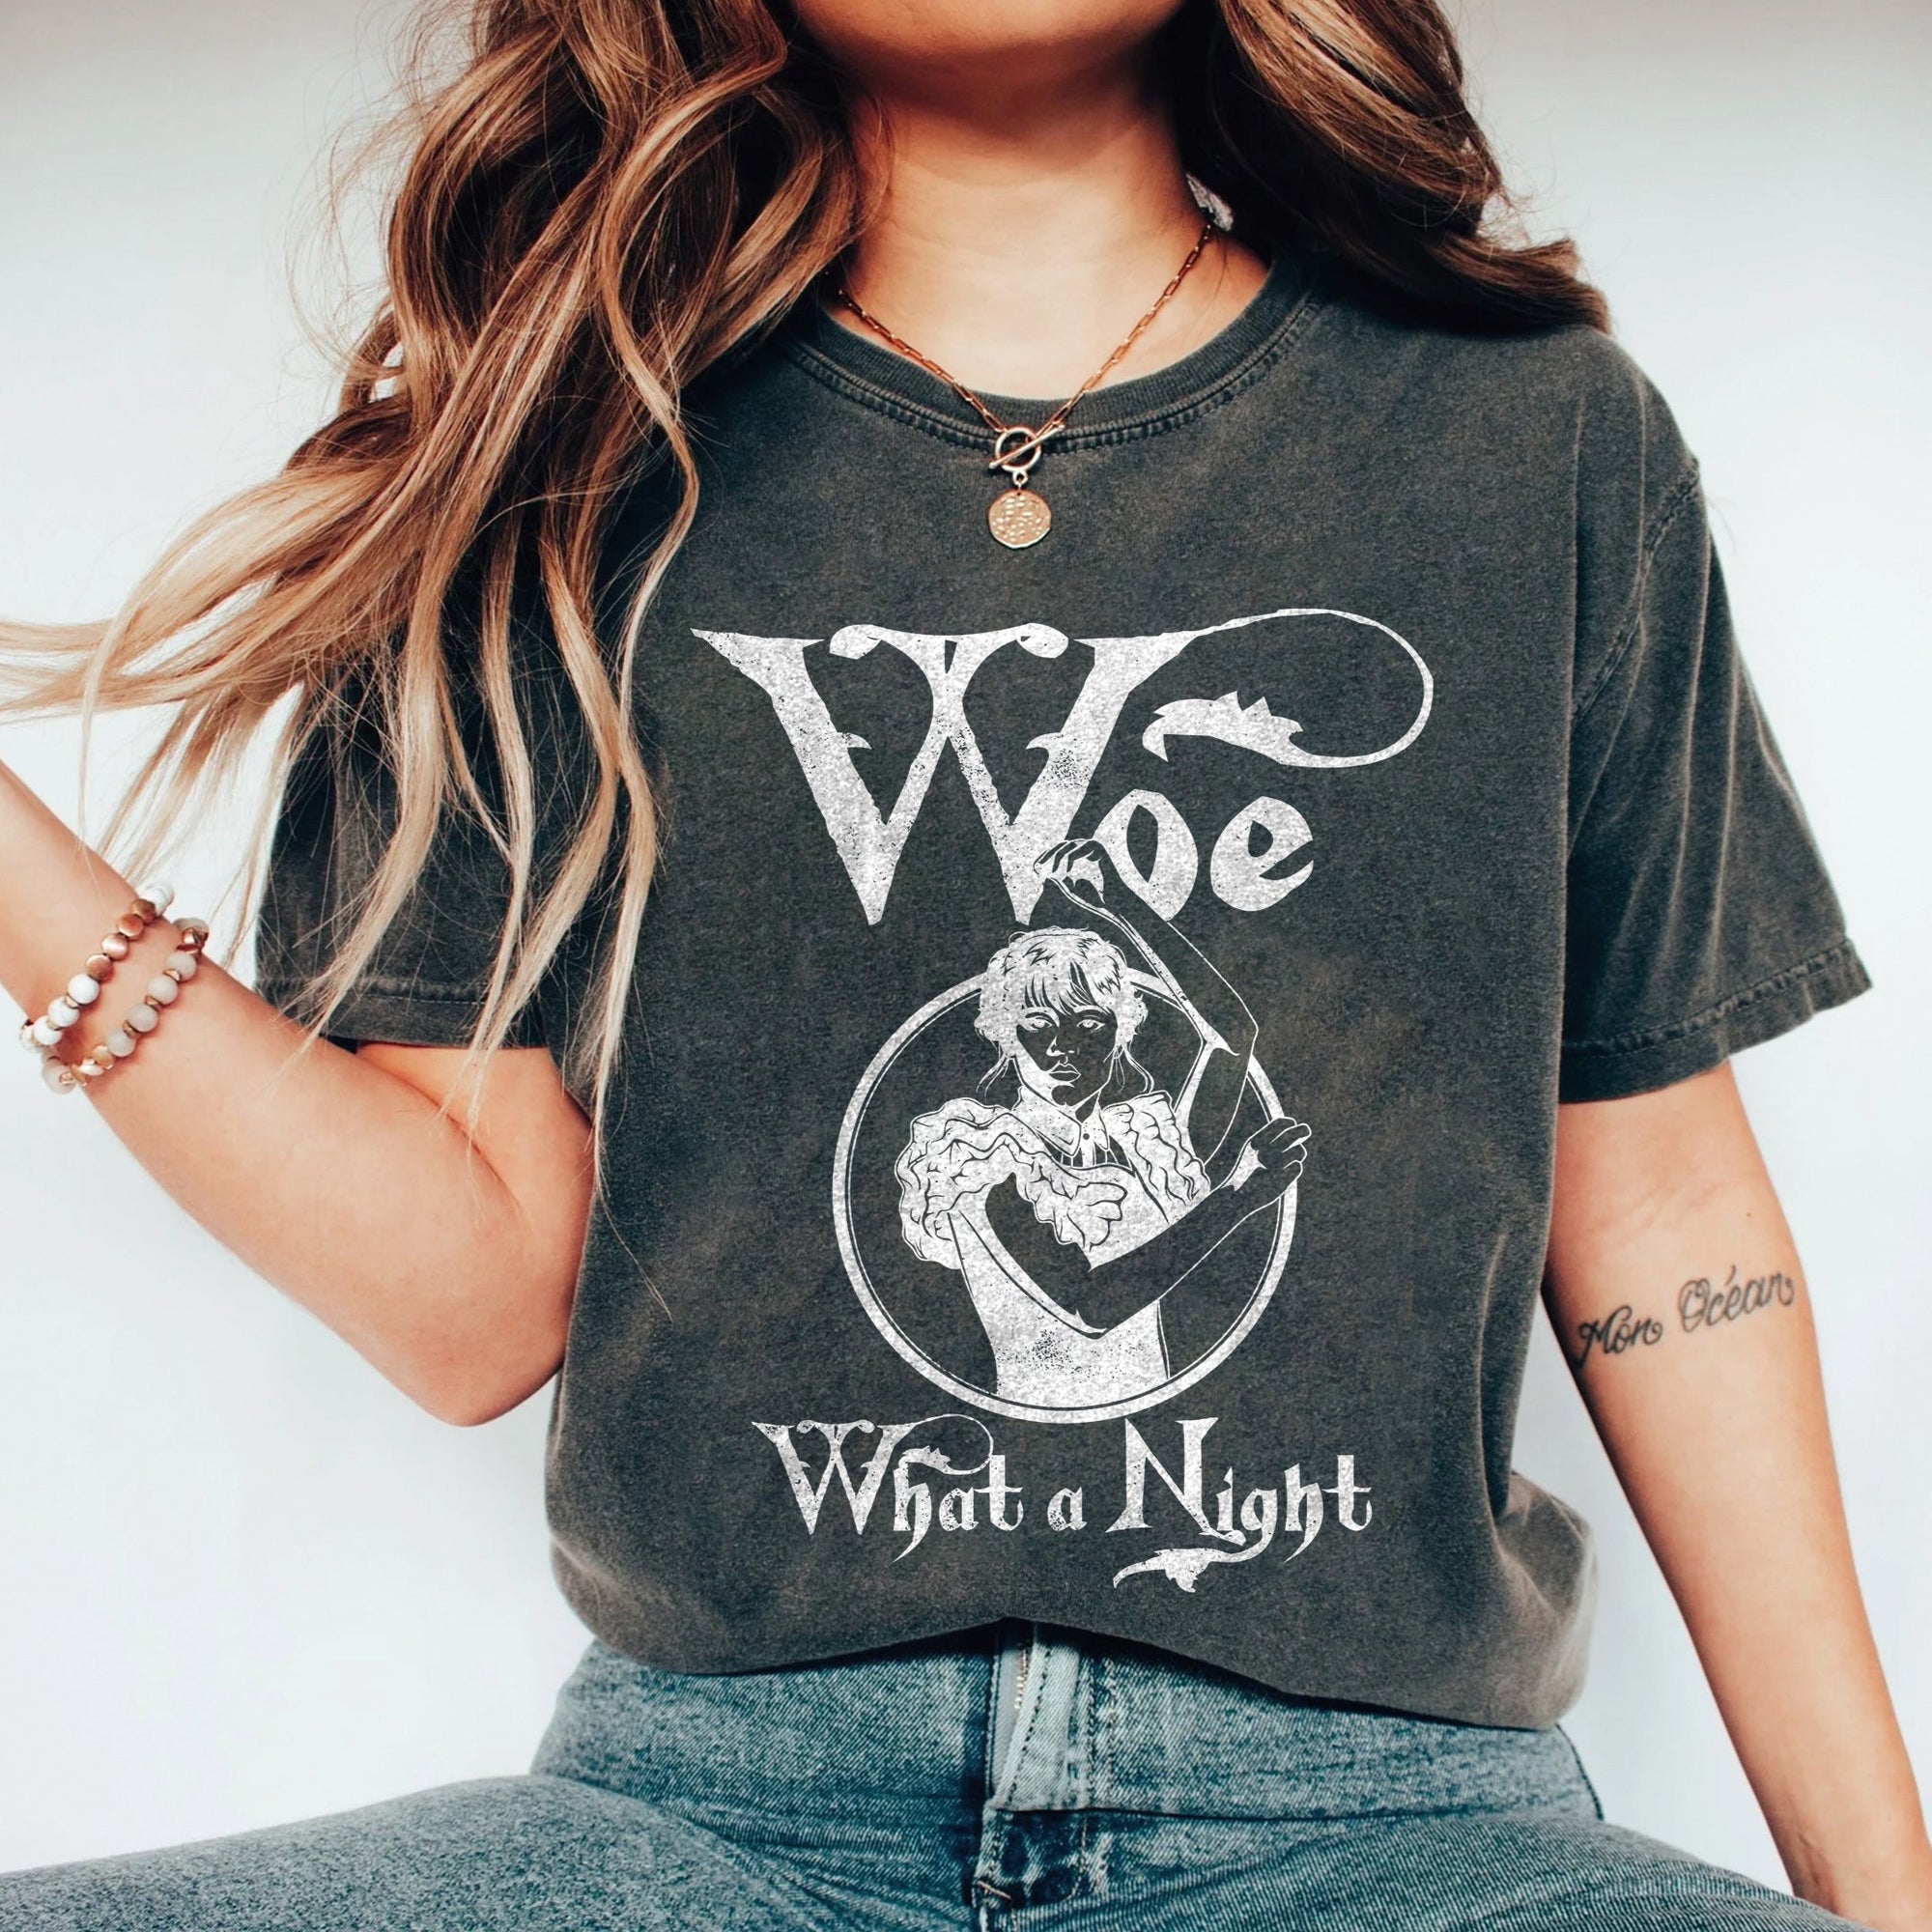 Woe What a Night Garment-Dyed Tee